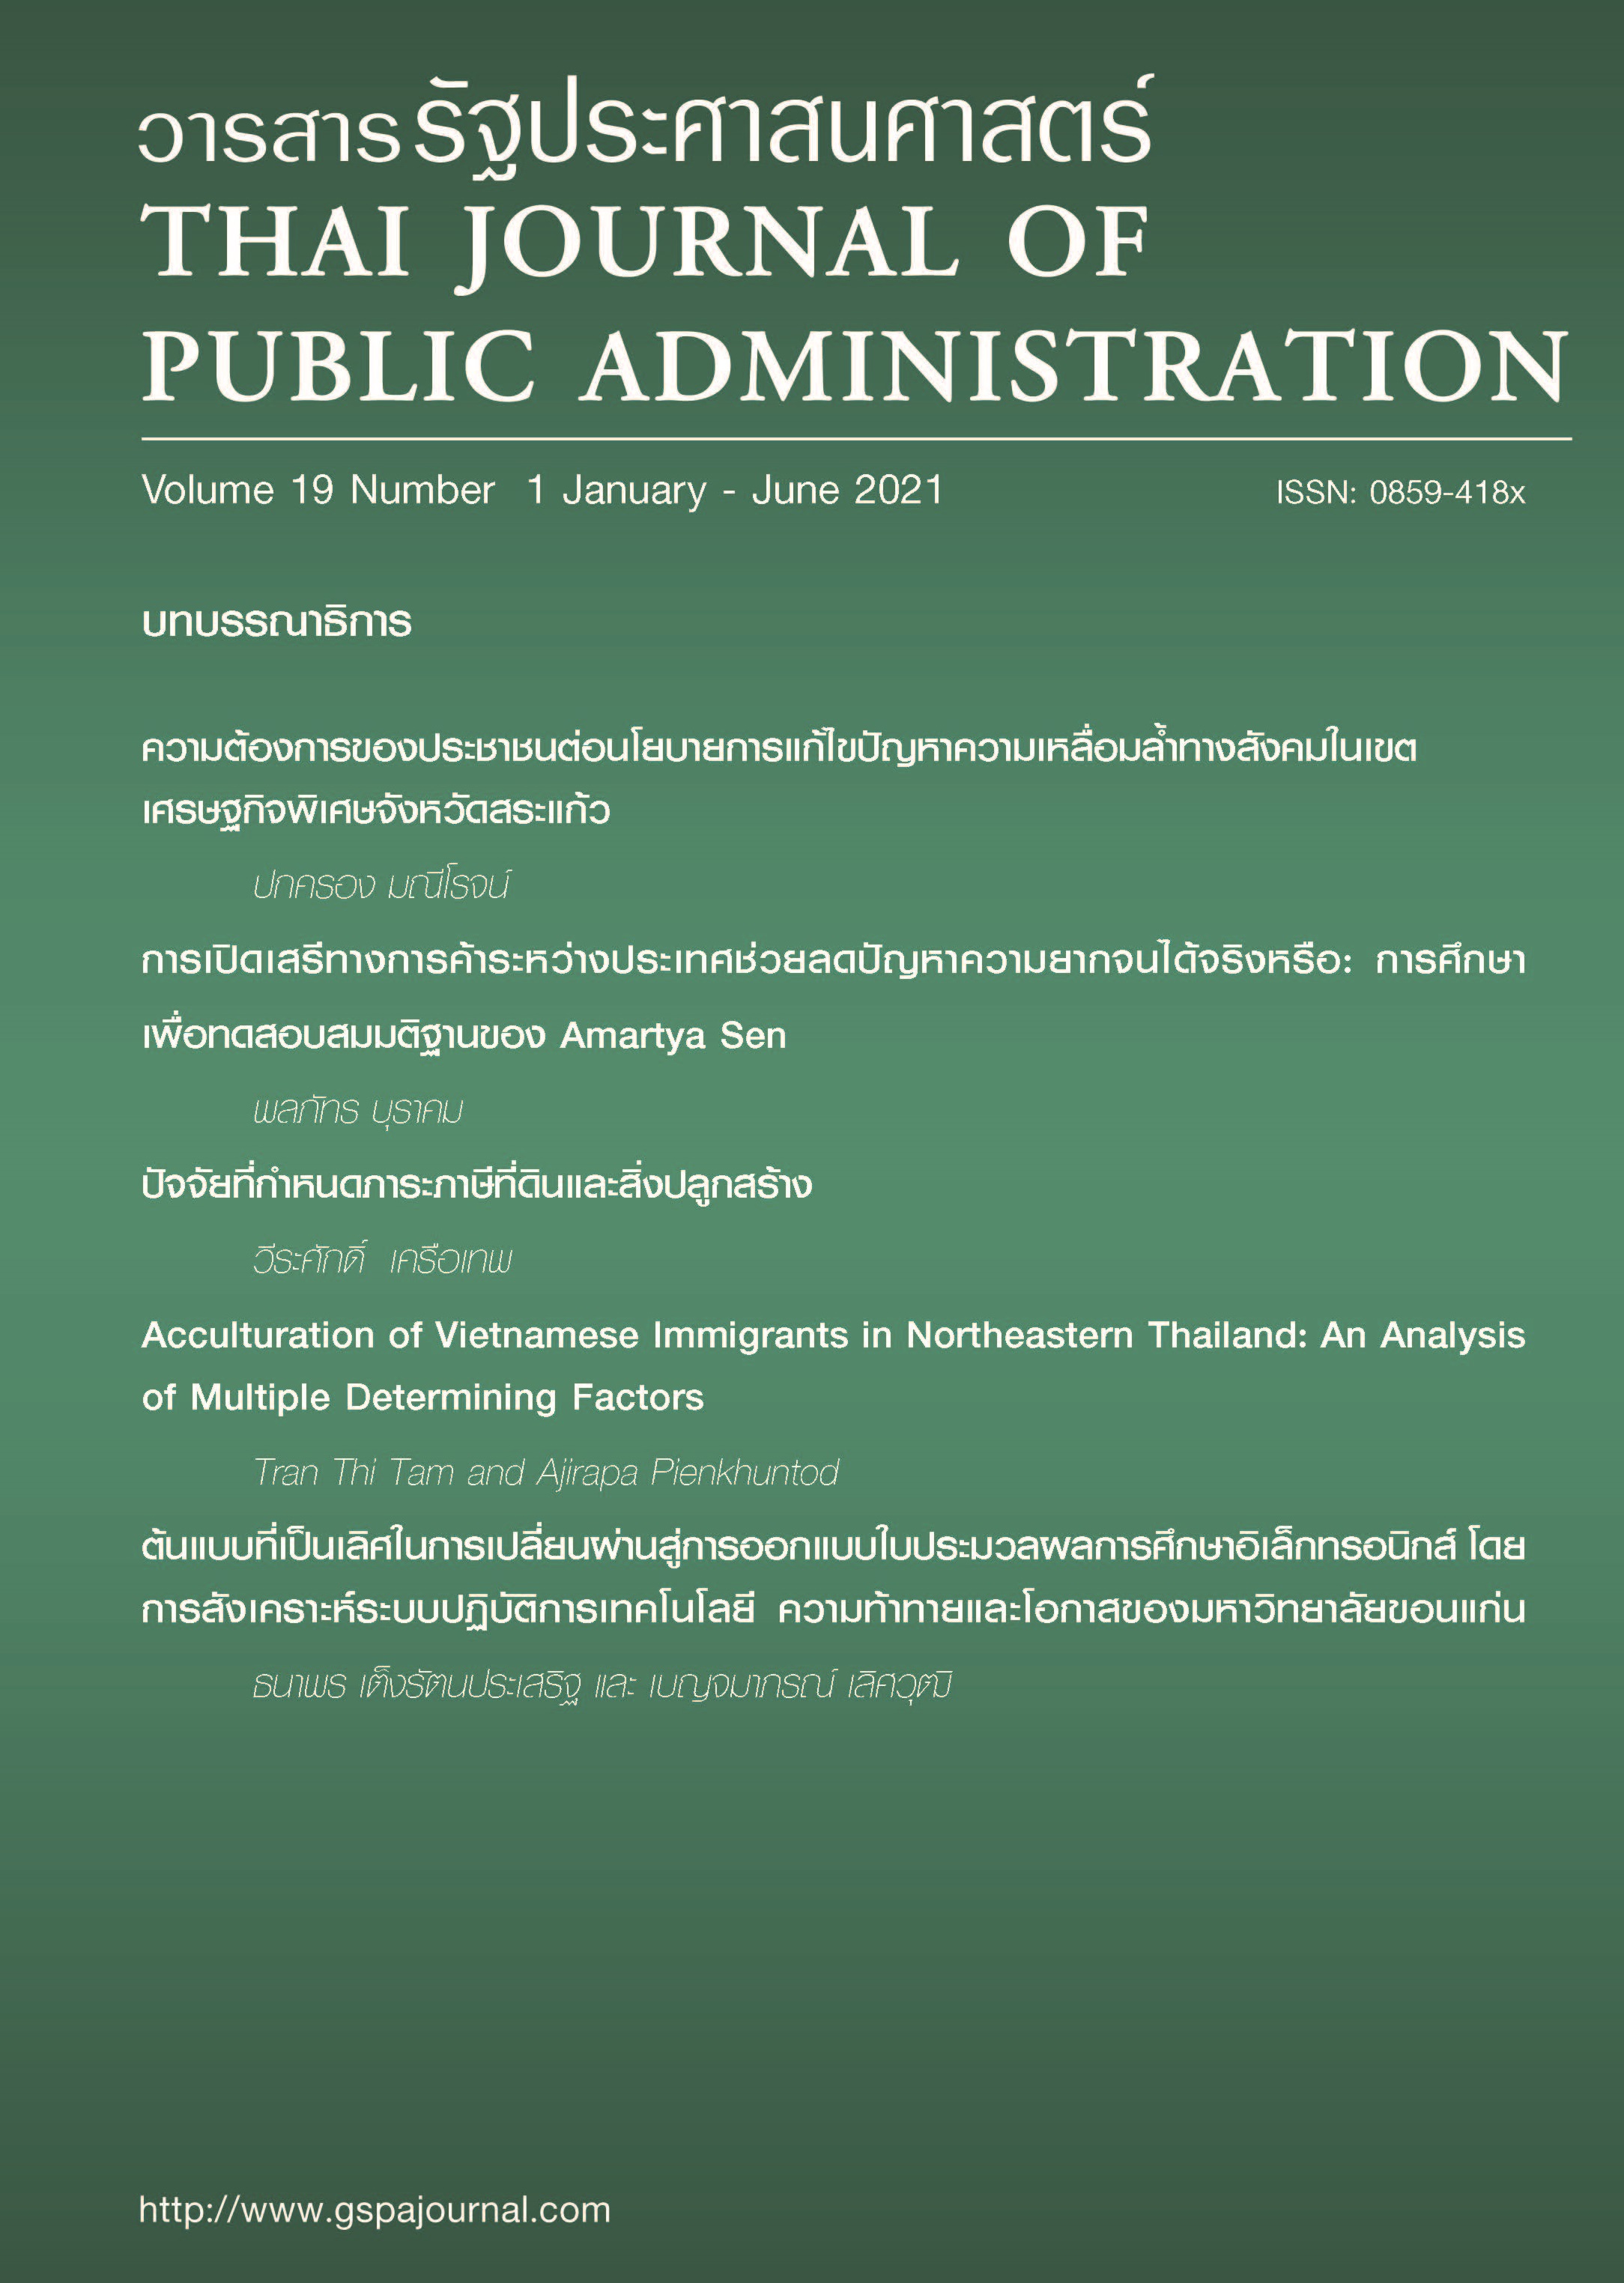 					View Vol. 19 No. 1 (2021): Thai Journal of Public Administration Volume 19 Number 1
				